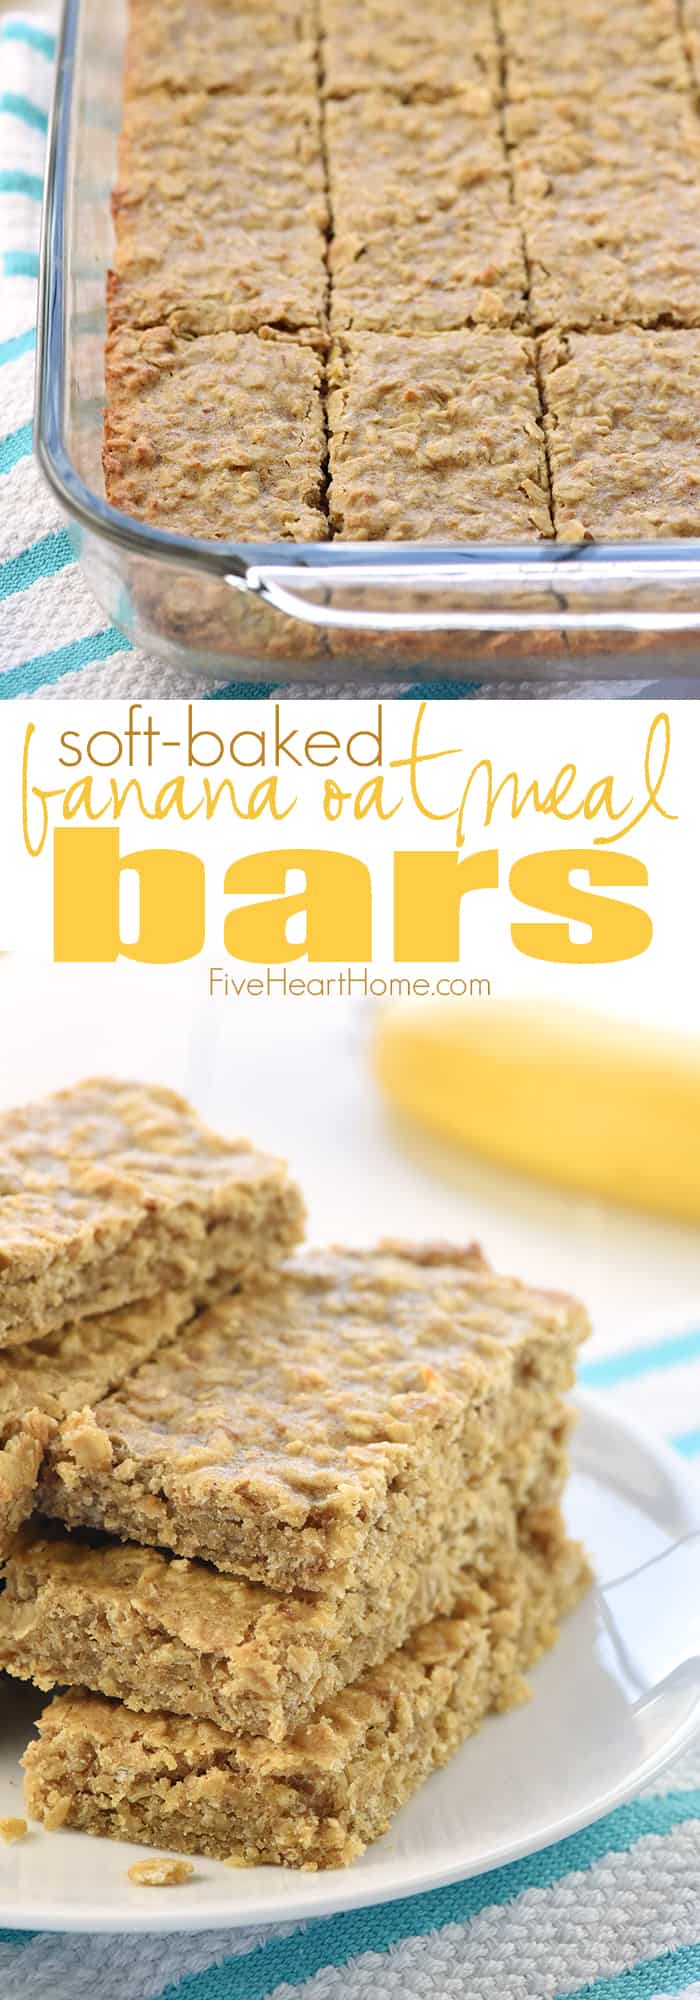 Soft-Baked Banana Oatmeal Bars ~ loaded with wholesome ingredients for a yummy, portable breakfast or snack! | FiveHeartHome.com via @fivehearthome